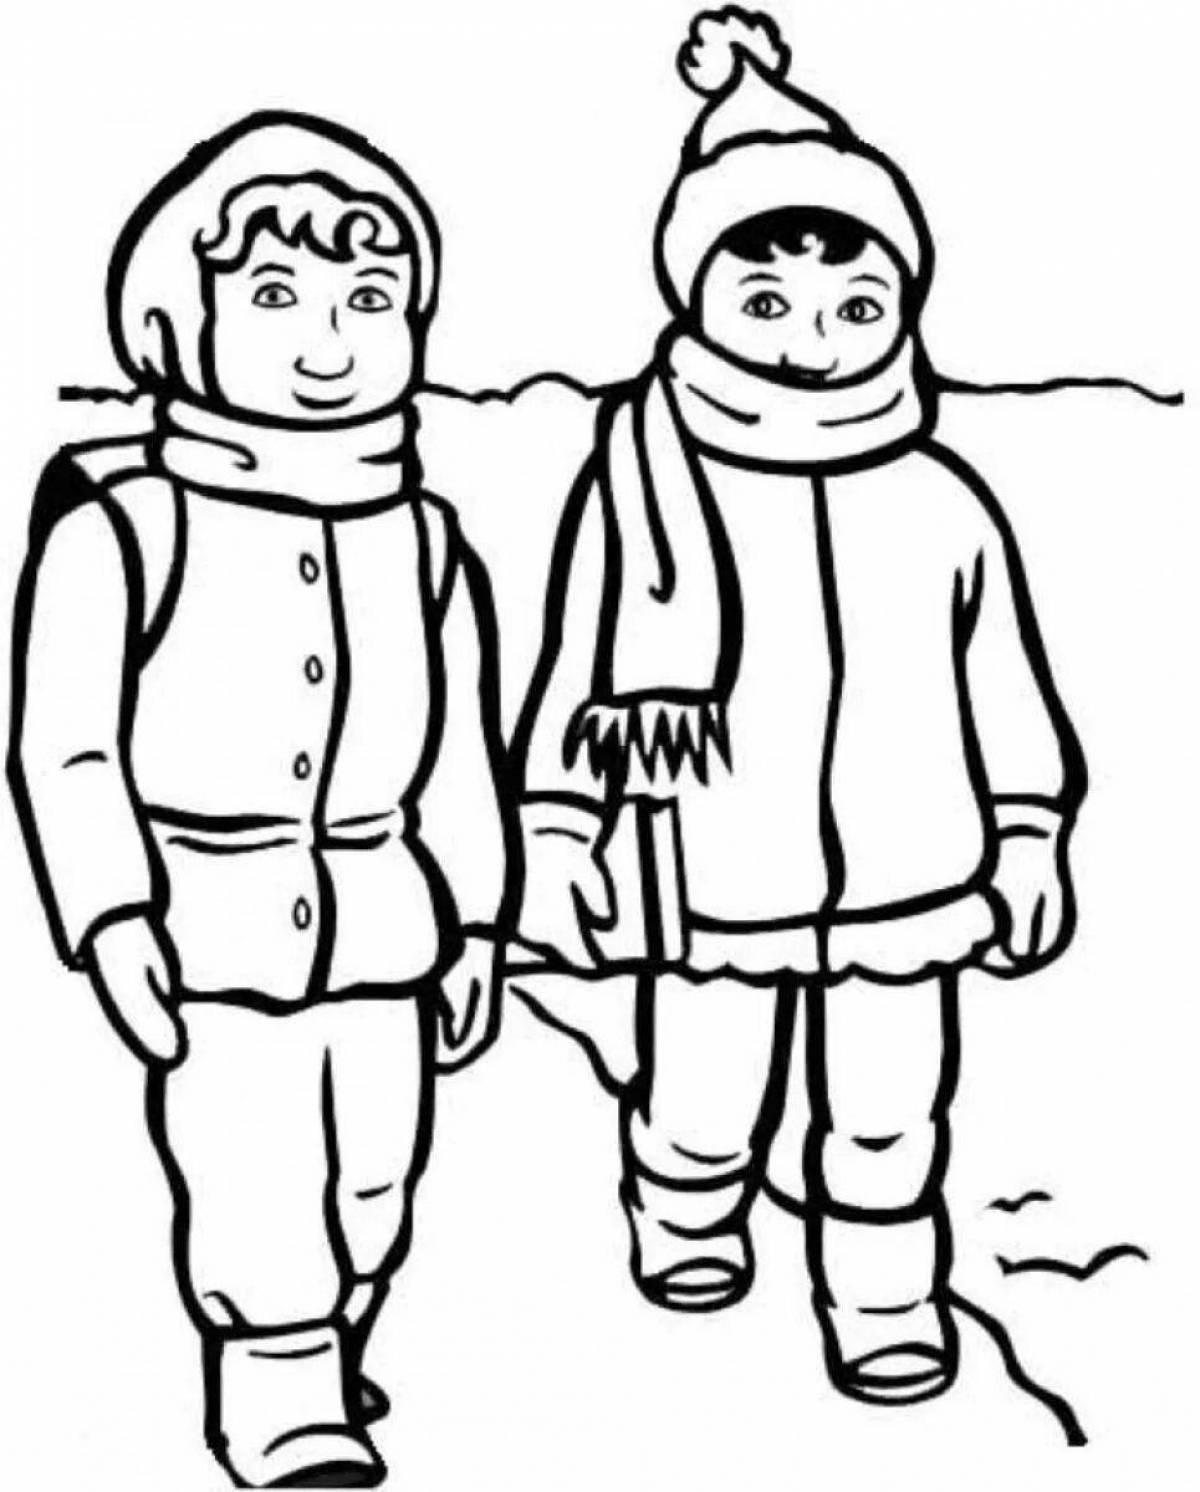 Children's winter clothes coloring book